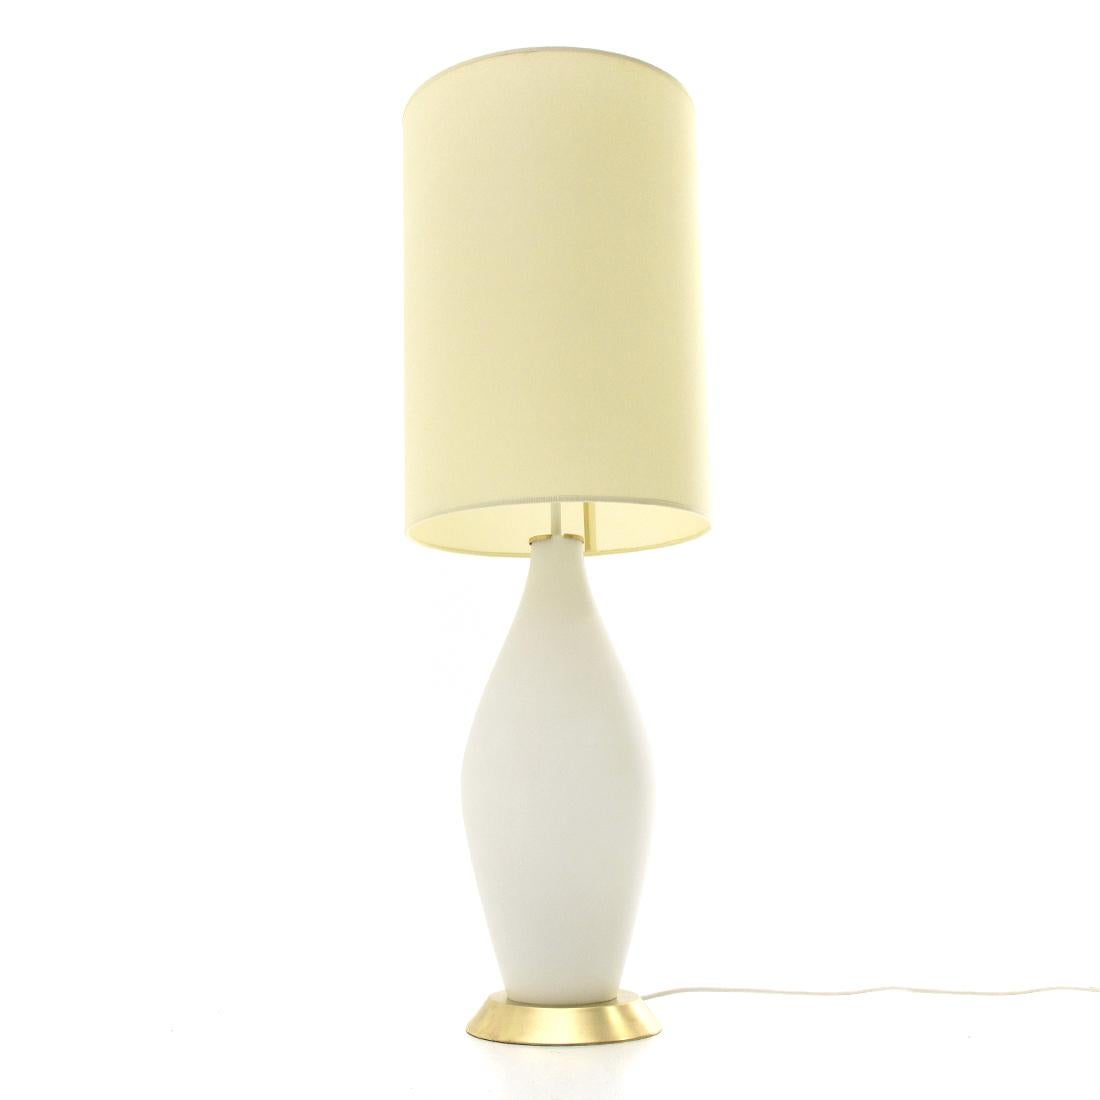 Mid-Century Modern Table Lamp in Opal Glass and Brass with Parchment Shade, 1950s For Sale